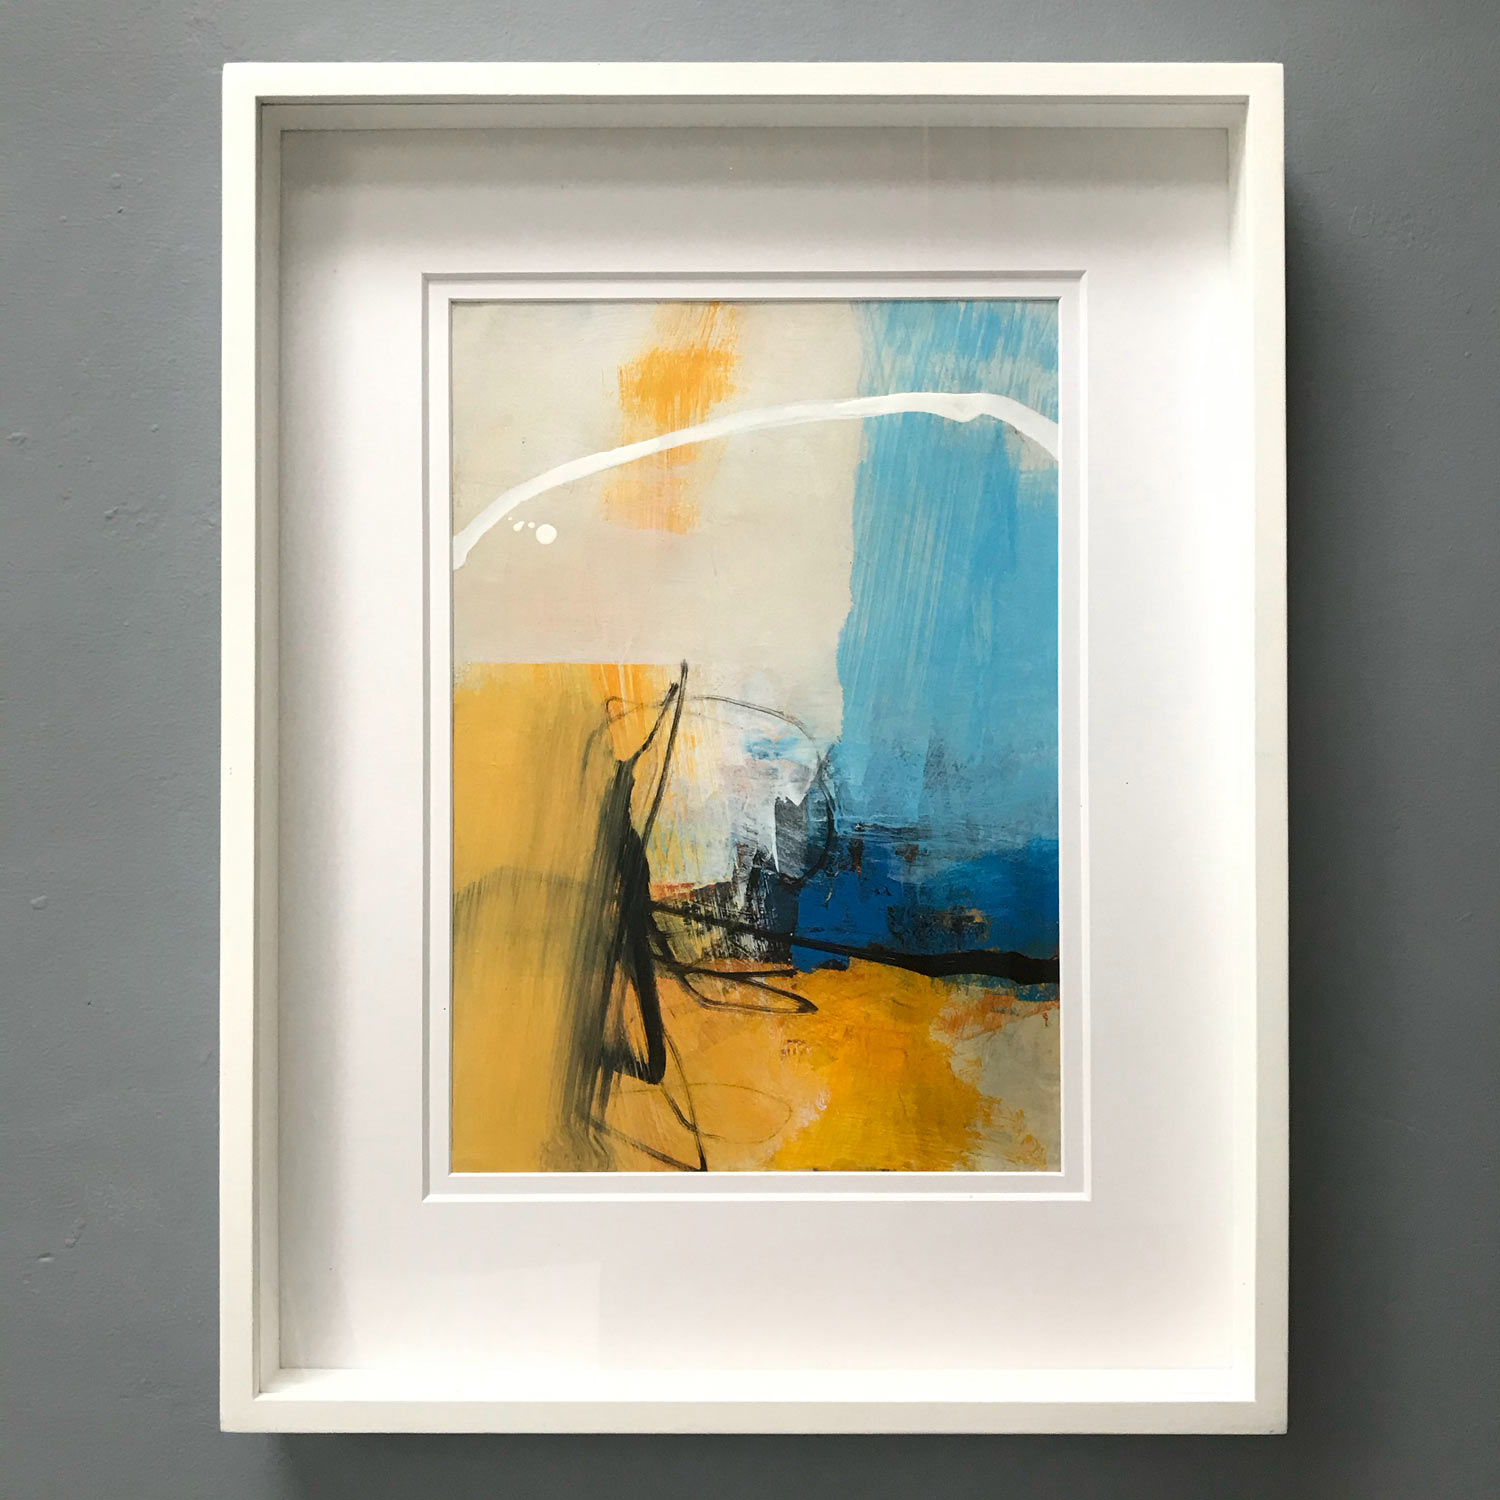 Antibes framed by Neil Canning for his studio collection winter 2021